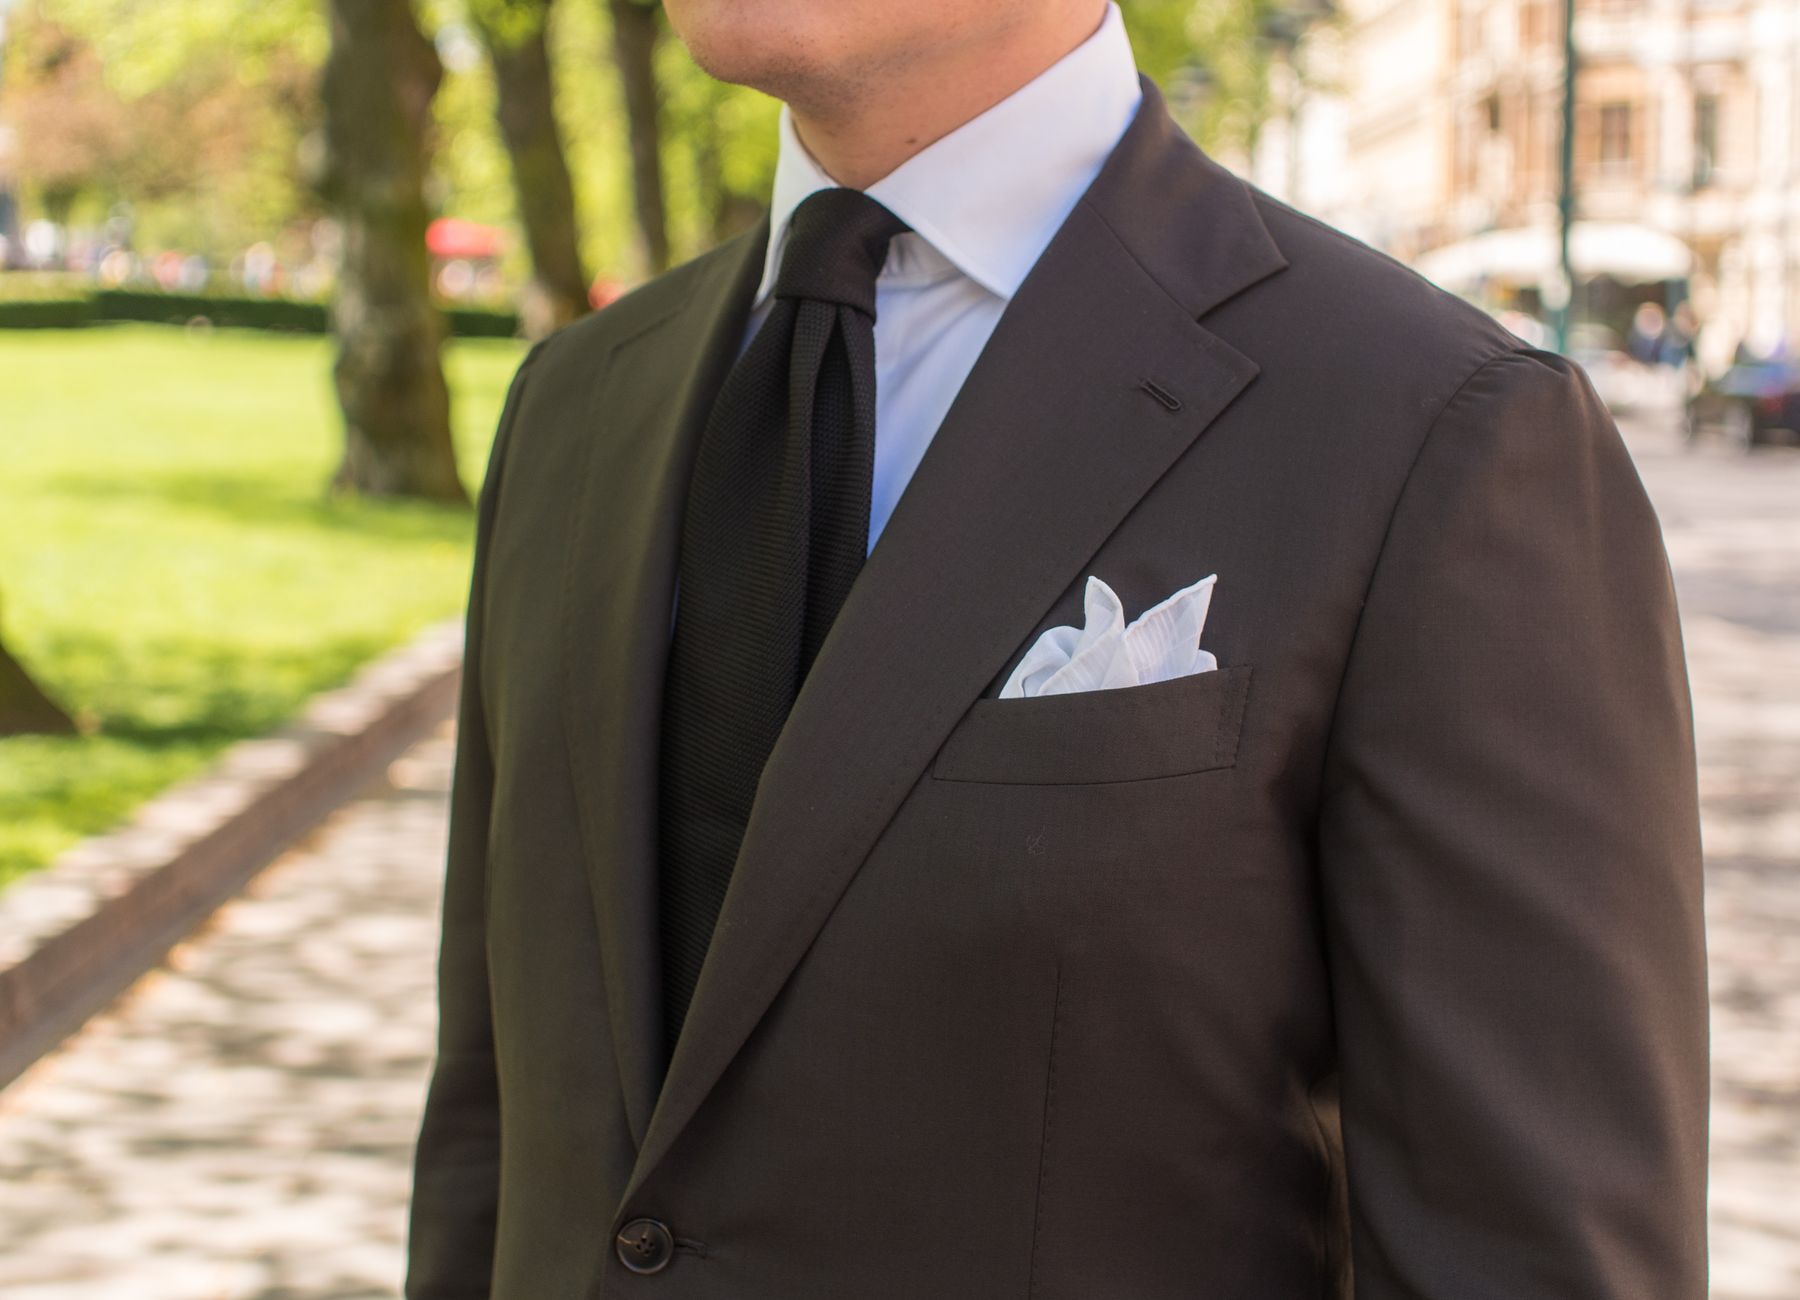 Wearing a Black Tie with a Brown Summer Suit